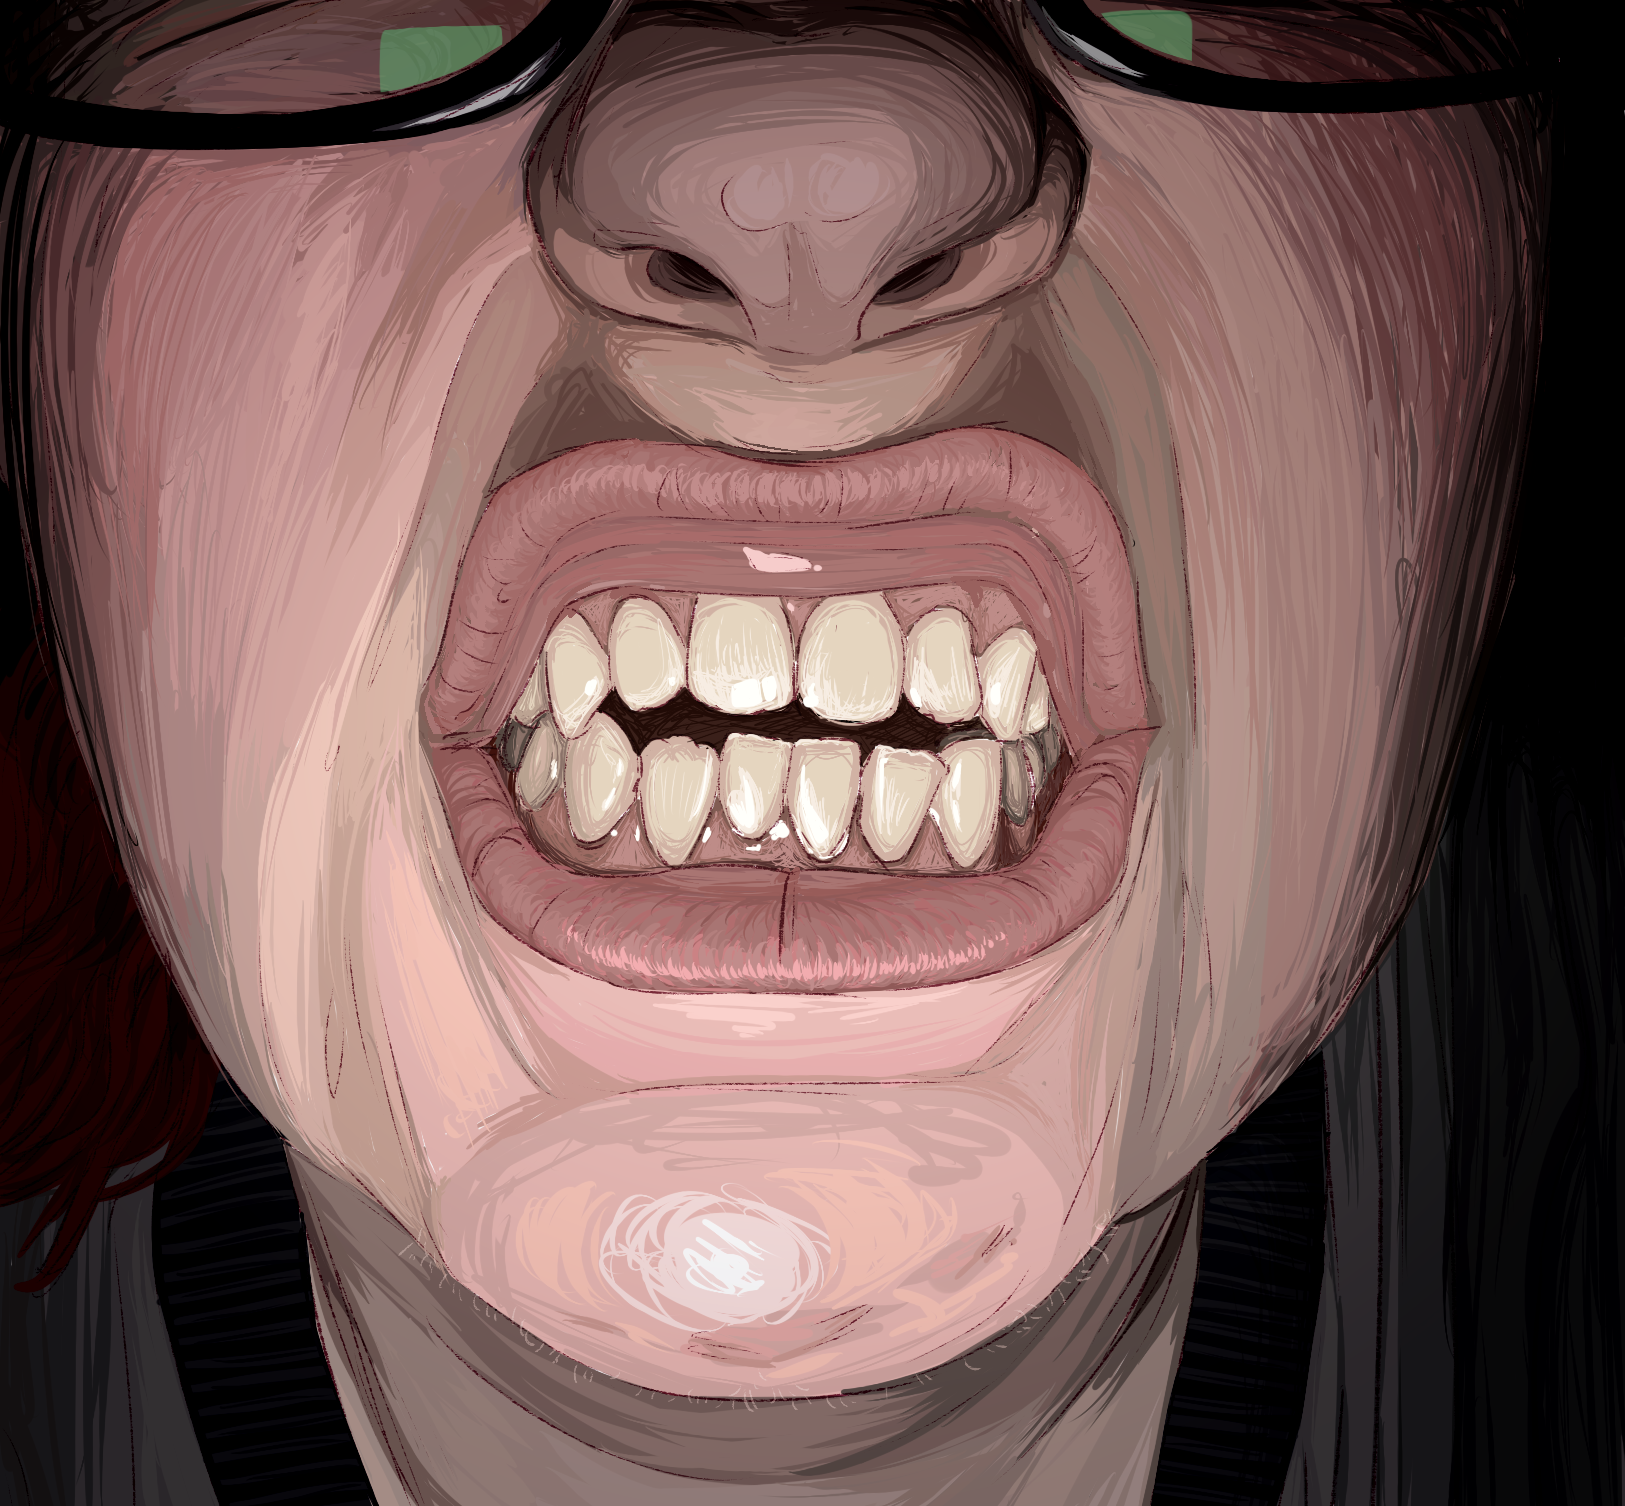 A painting of a mouth with lips open in a snarl to show the teeth. The teeth are crooked, with the top front teeth pushed out and the bottom front teeth pushed in, leaving a permanent gap between them. 